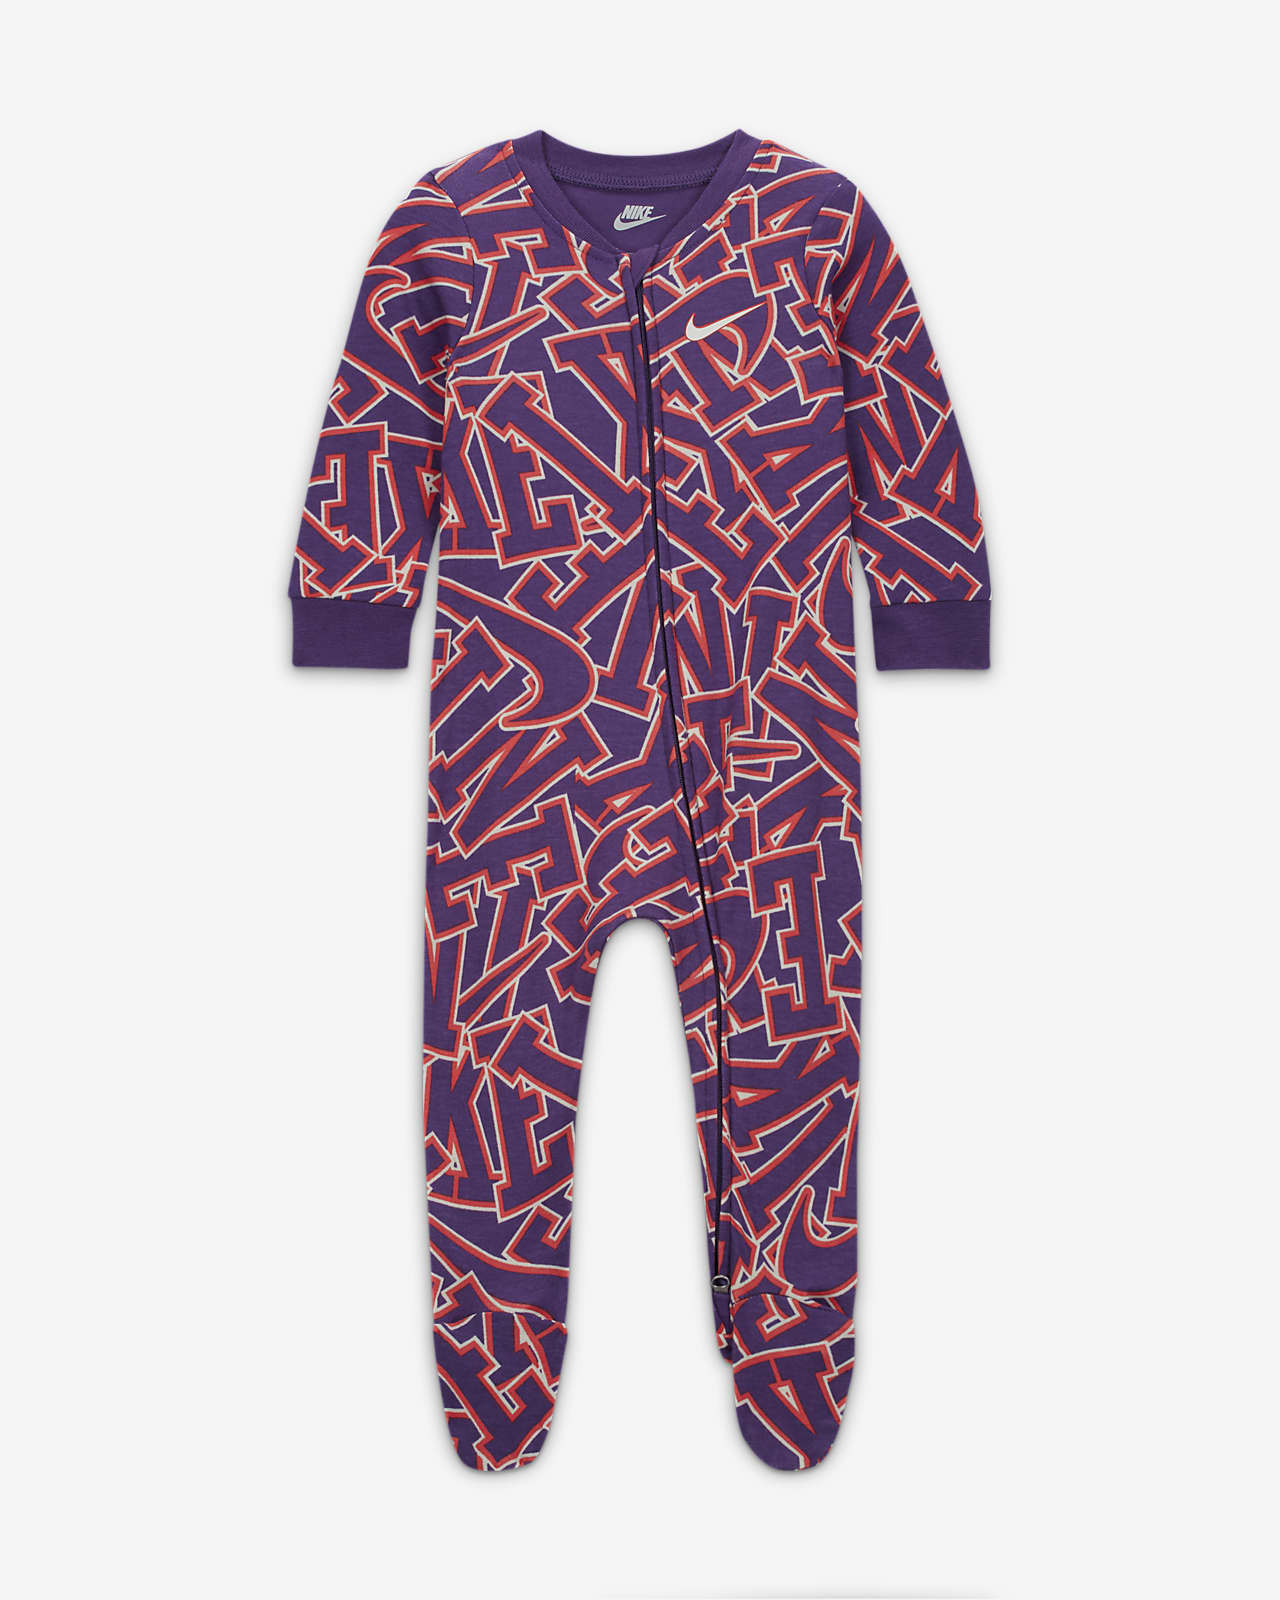 Nike "Join the Club" Footed Coverall Baby Coverall